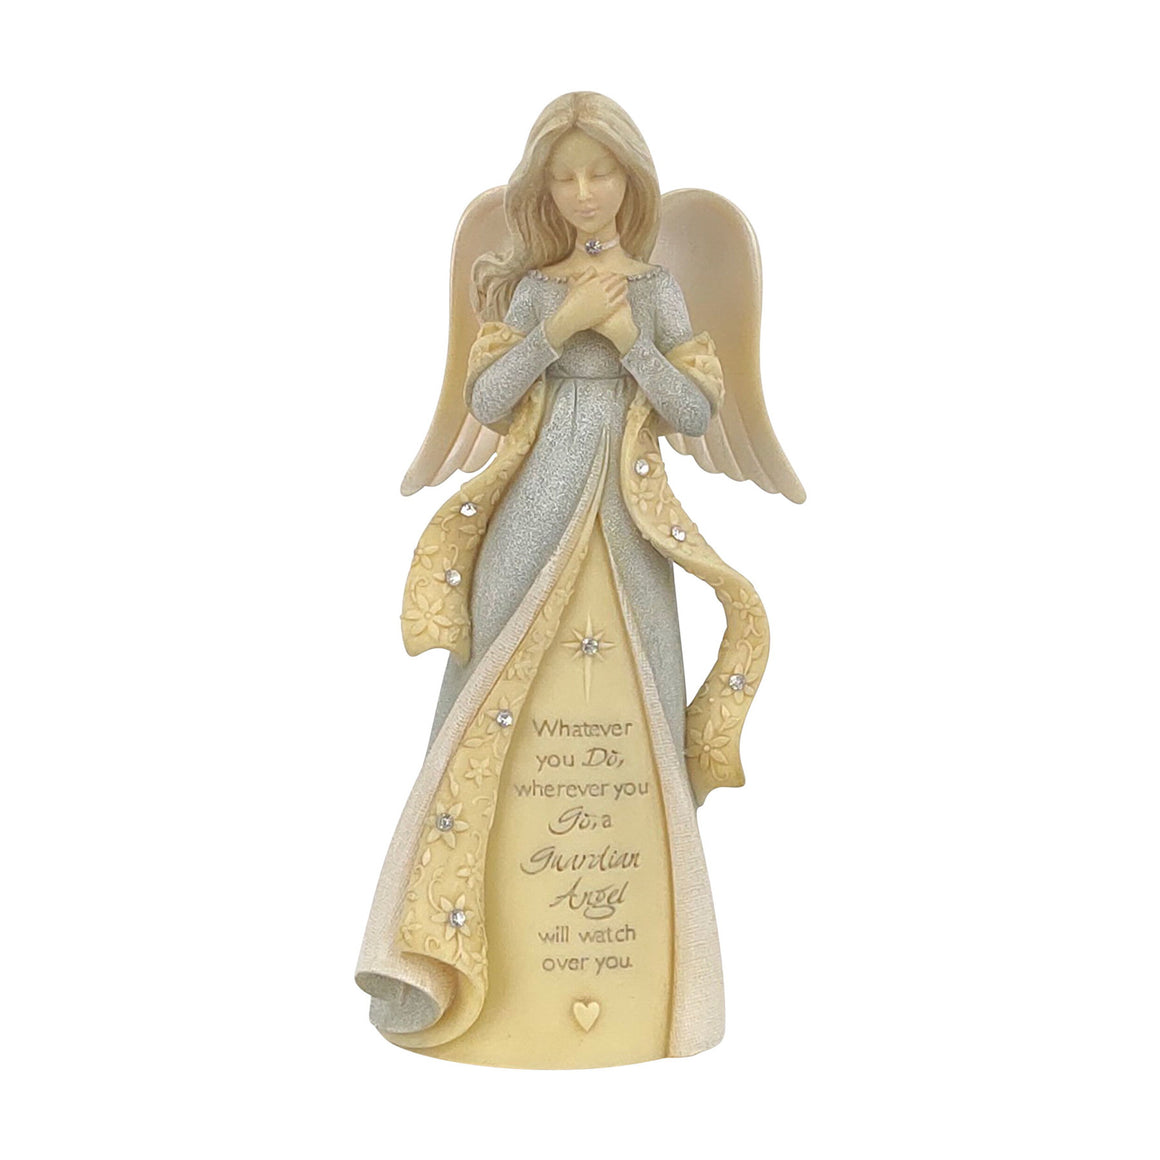 Mini Guardian Angel Crystal Stone Resin Figurine from the Foundations Collection